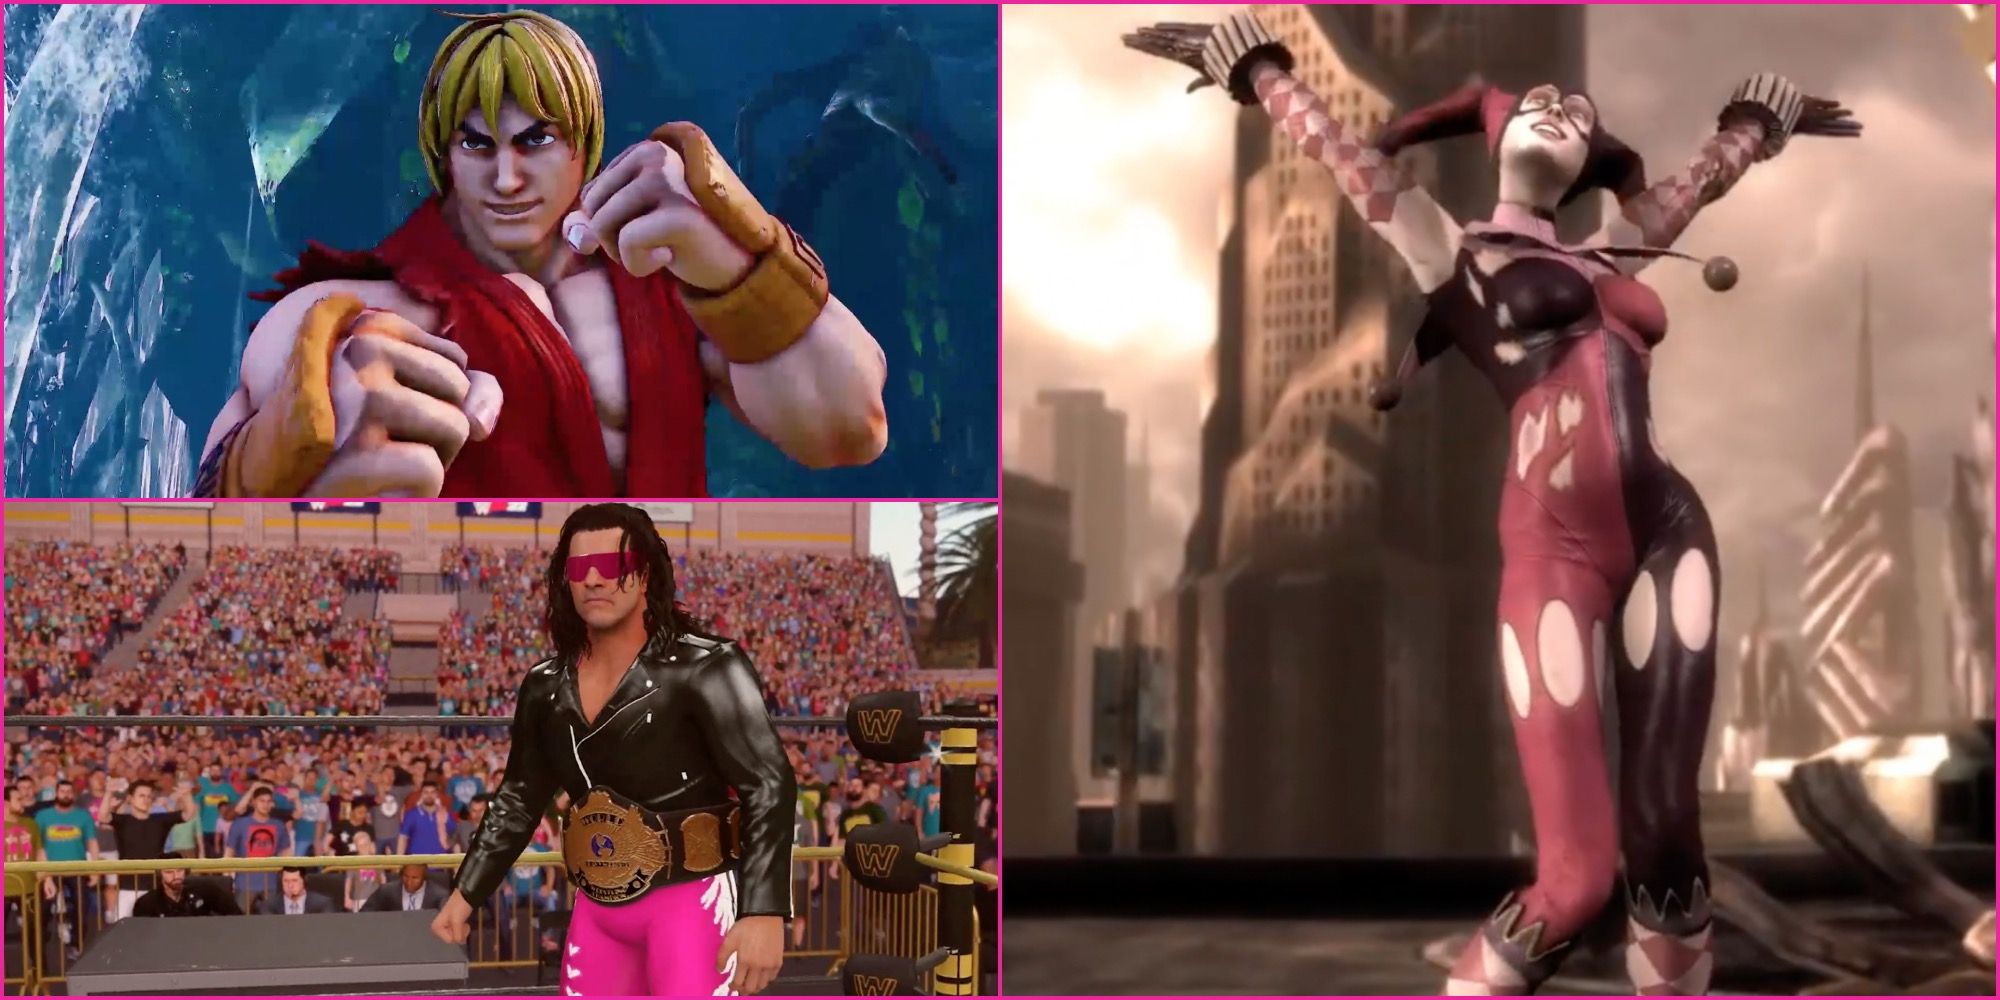 iconic Fighting Stances in Video Games - Feature - Ken Masters, Bret 'The Hitman' Hart, and Harley Quinn get ready to face their opponents